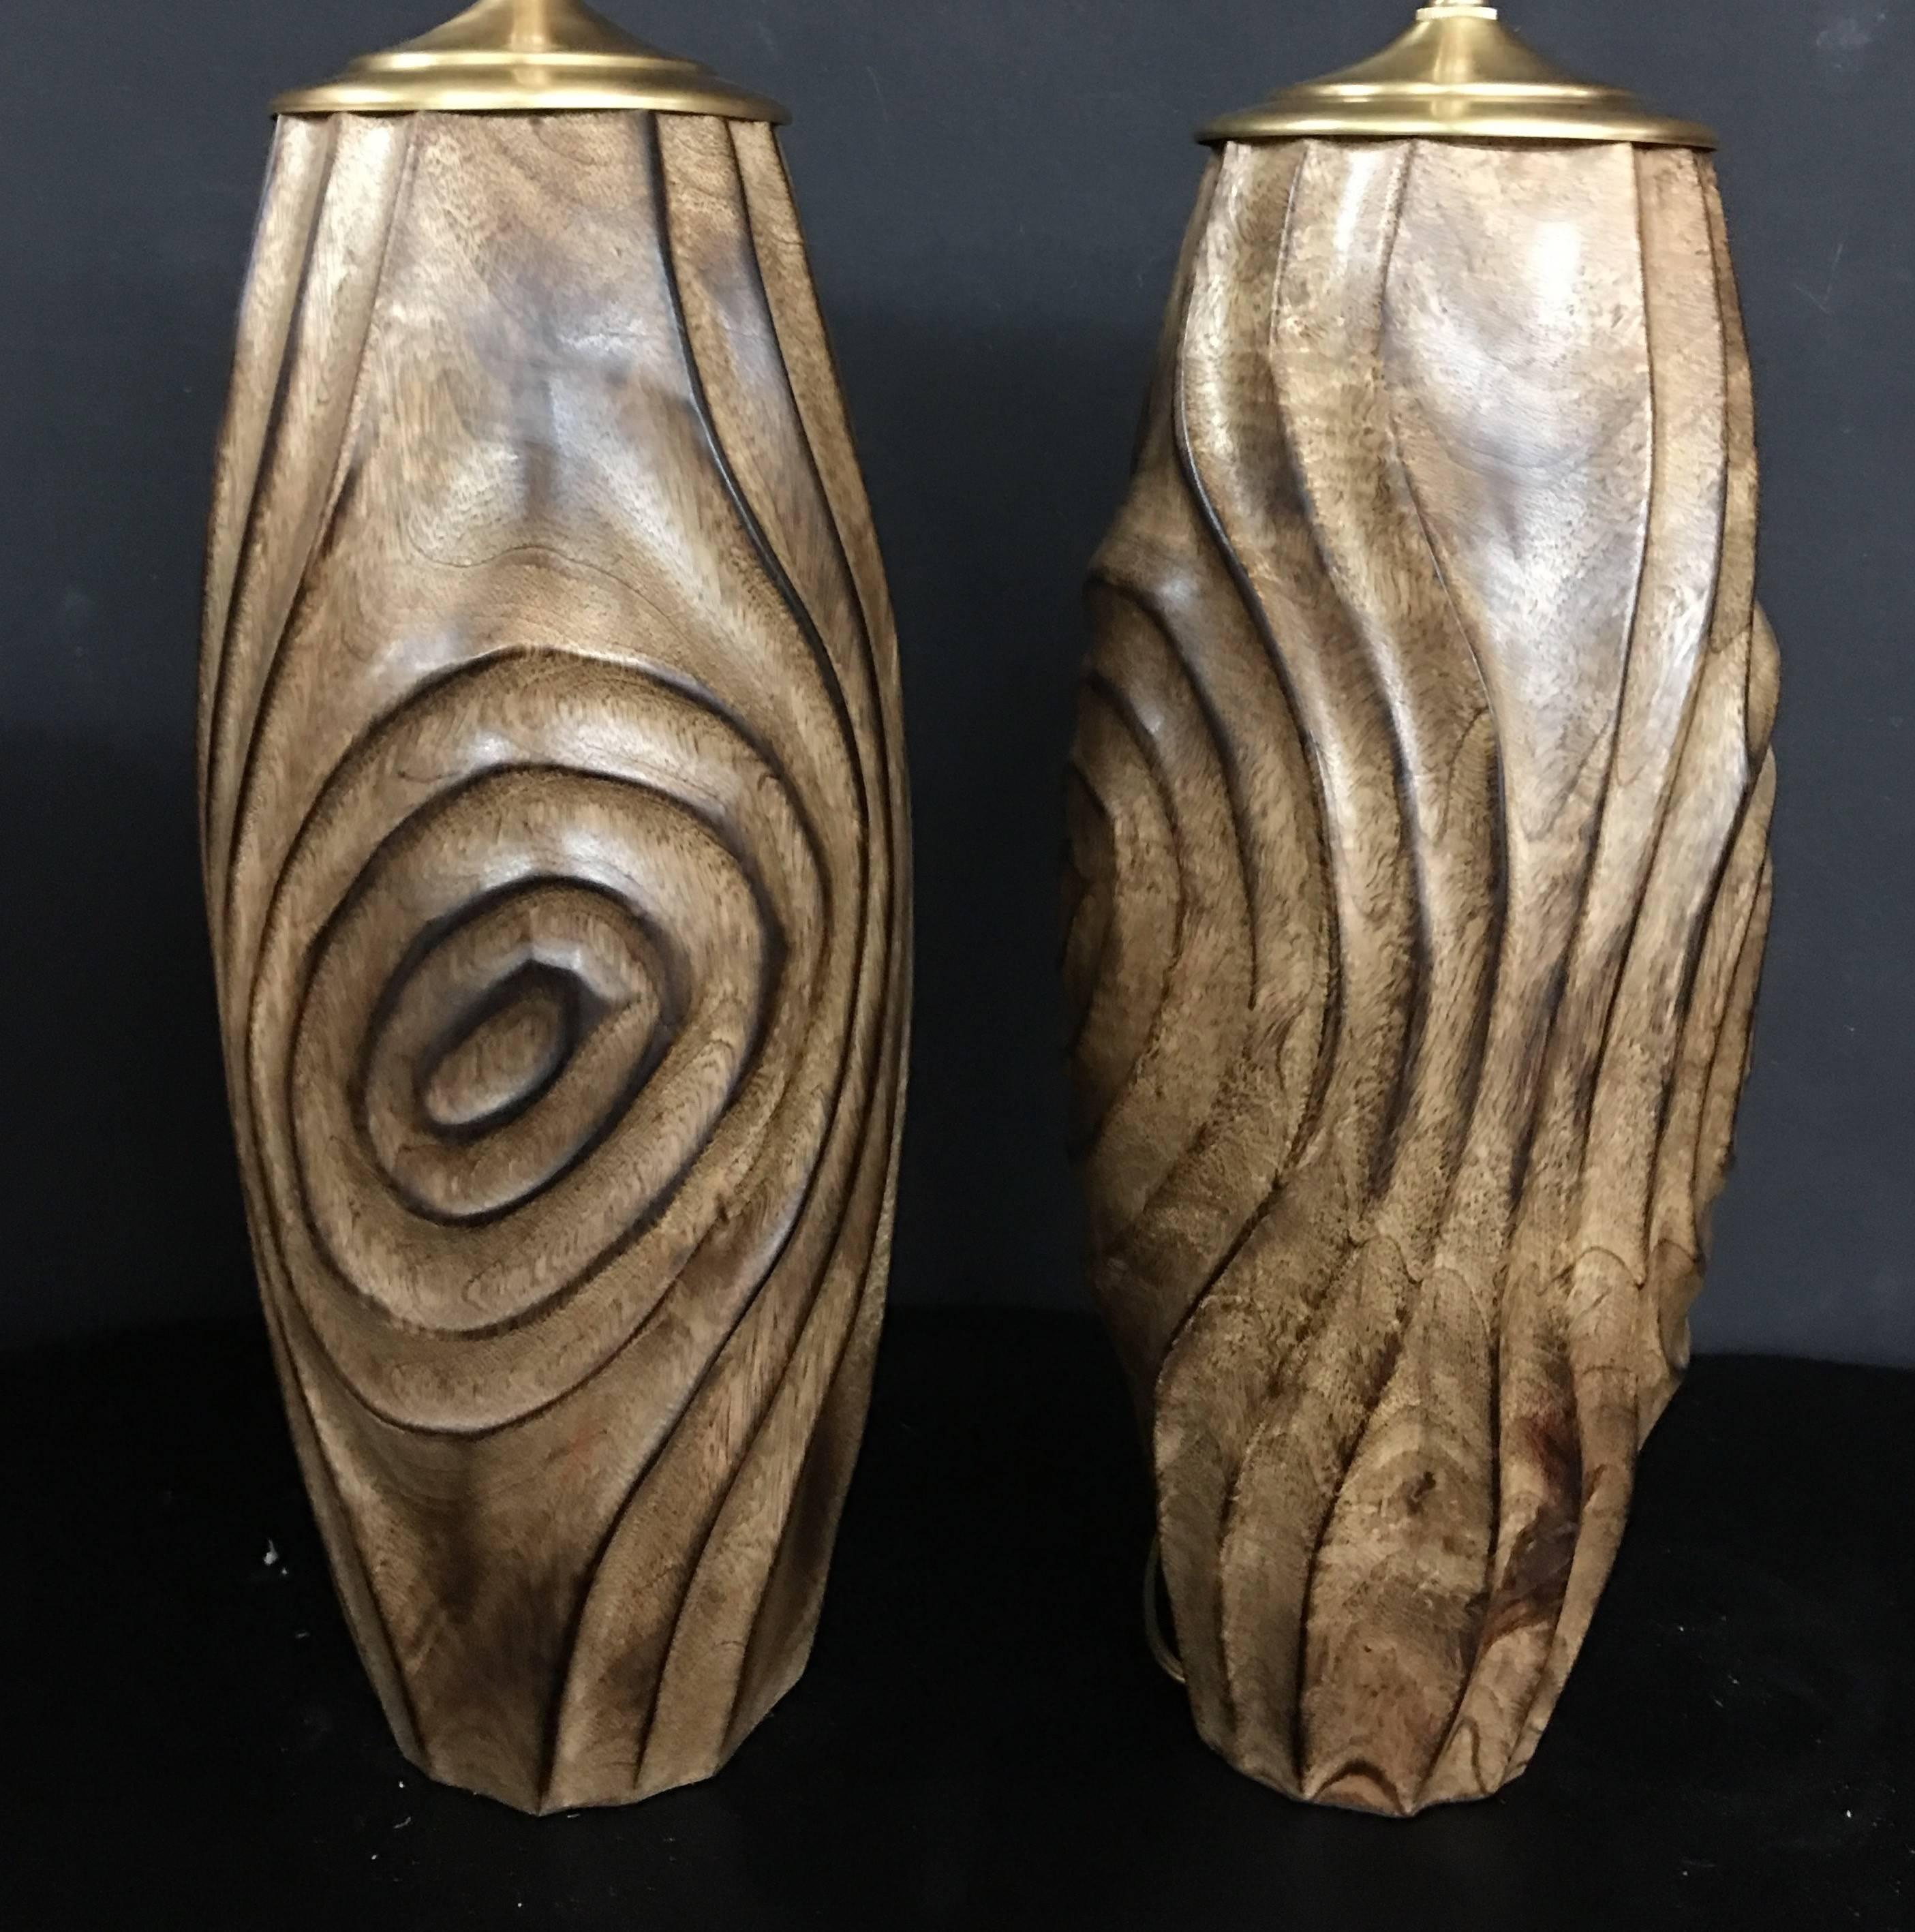 Unique pair of newly wired, hand-carved wood vessels with lamp application. The hardware is brushed brass and composes dual, individually controlled sockets. The vessel height is 16